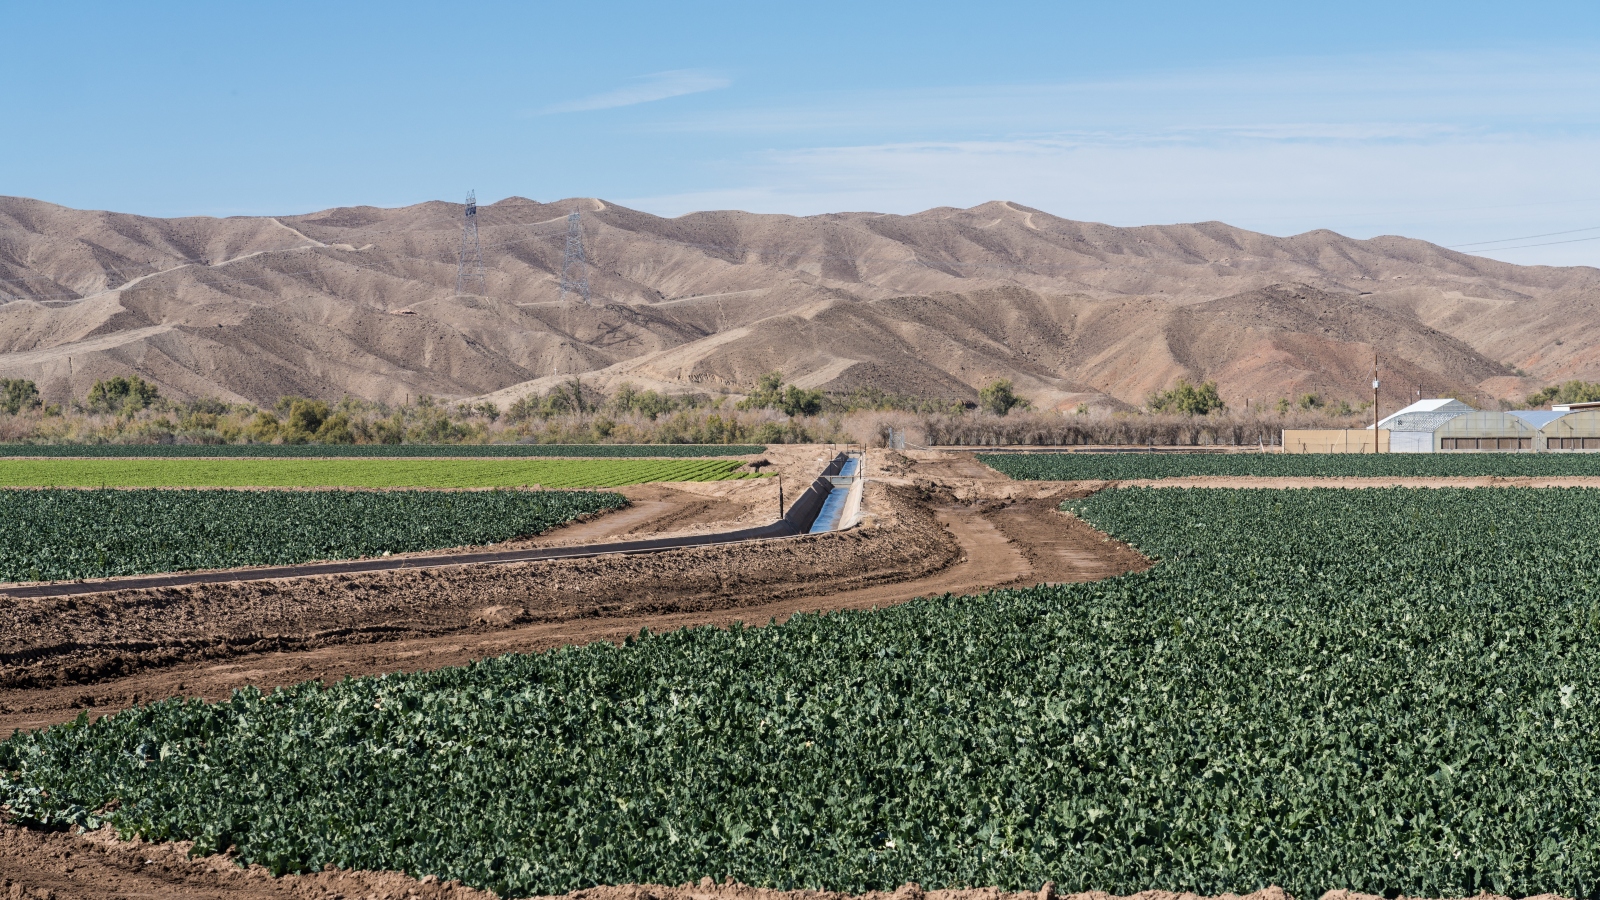 An irrigation canal carries water from the Colorado River to irrigate a farm growing leaf lettuce and broccoli near Yuma, Arizona.